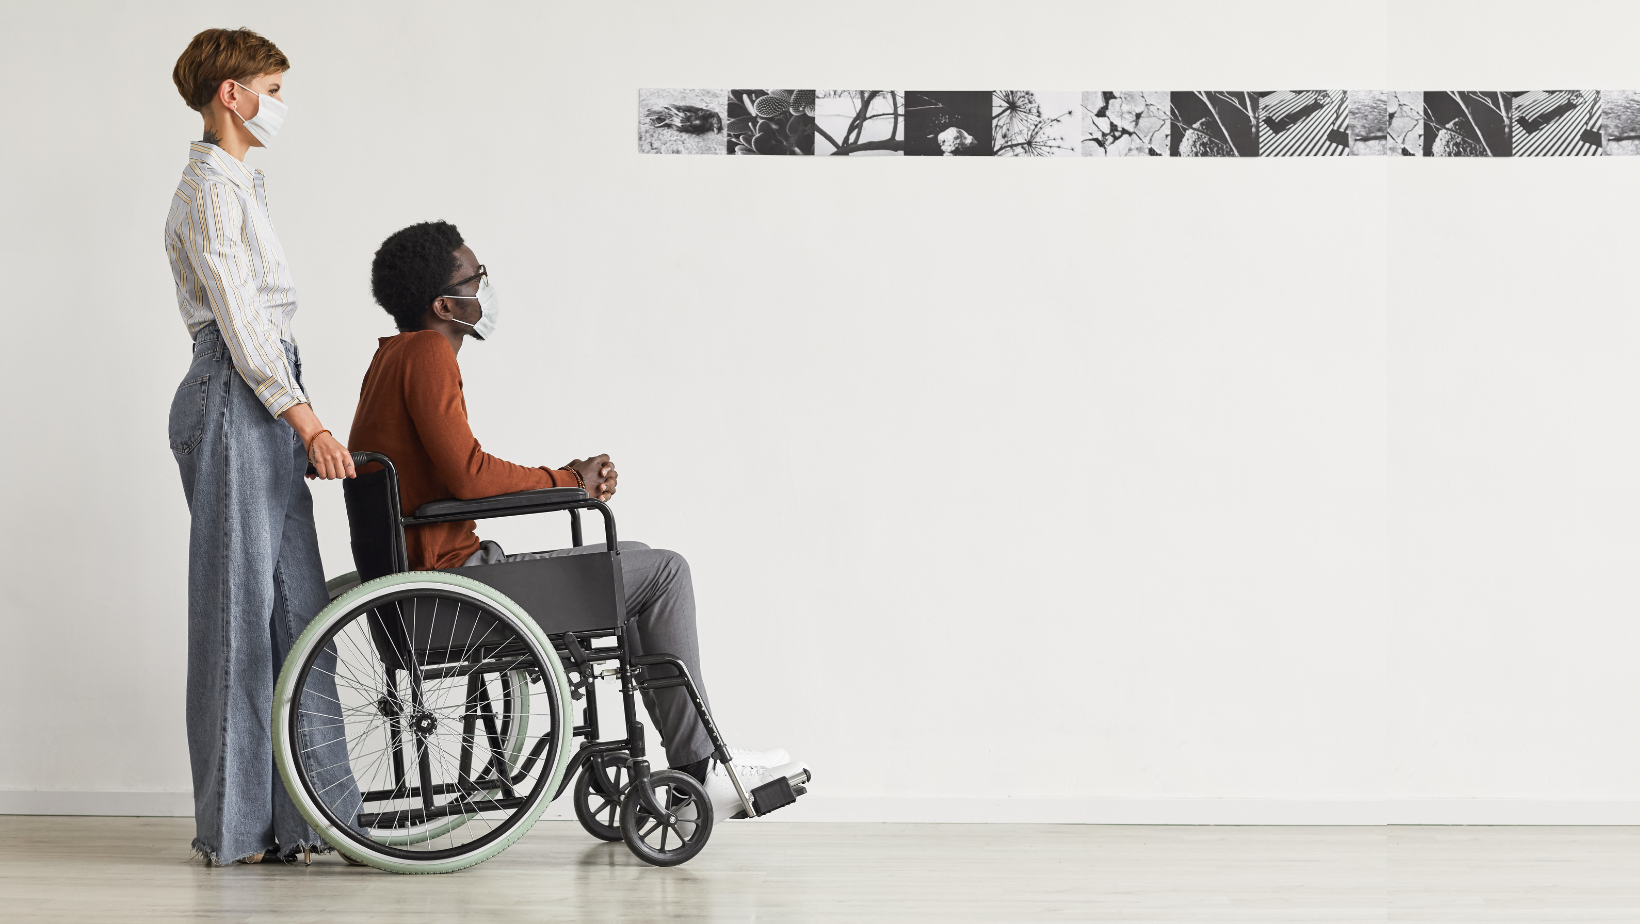 A Black man using a wheelchair looks at photos in a modern art gallery. A white woman stands behind him, hands resting on the chair's push handles. Both wear masks.